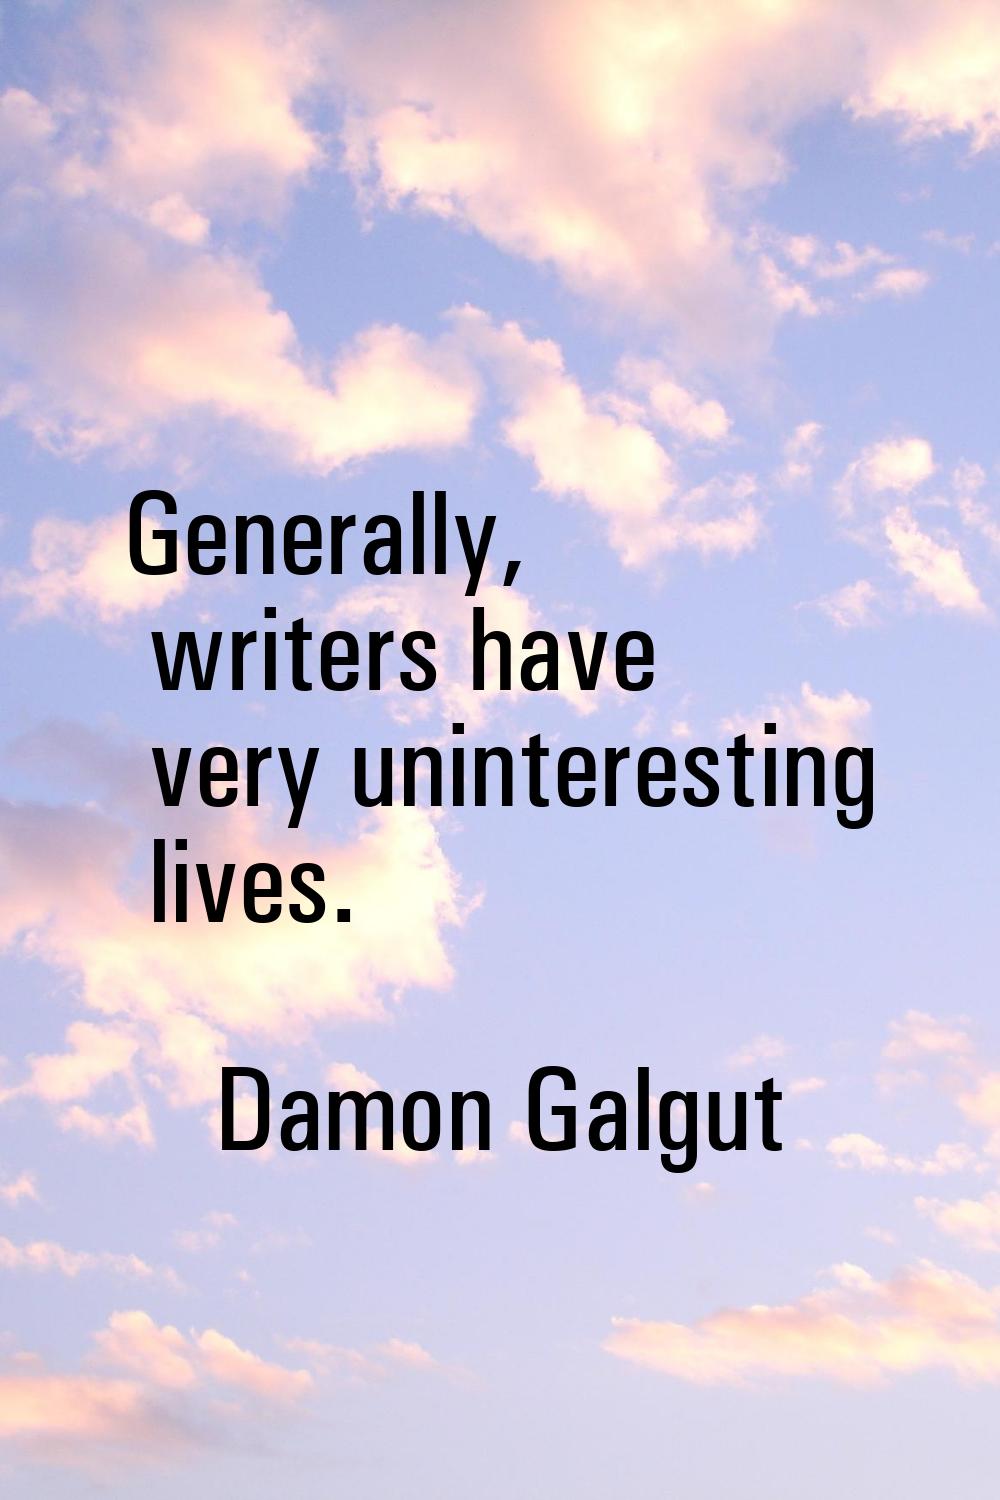 Generally, writers have very uninteresting lives.